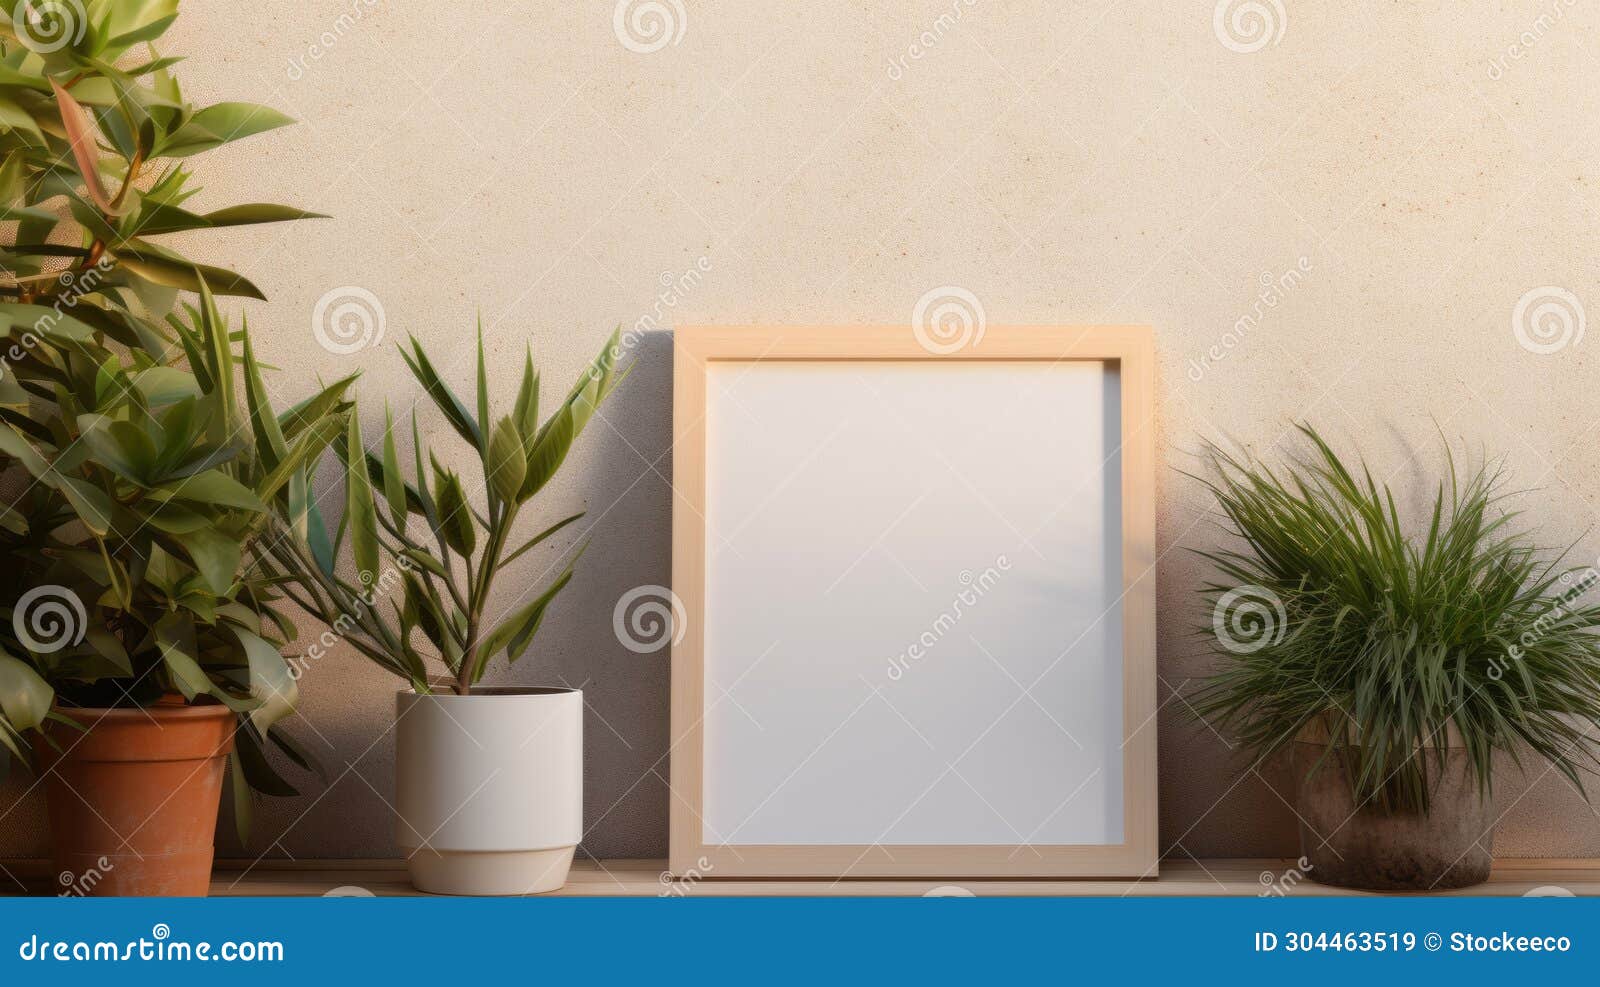 8k resolution poster frame with plants on wooden shelf